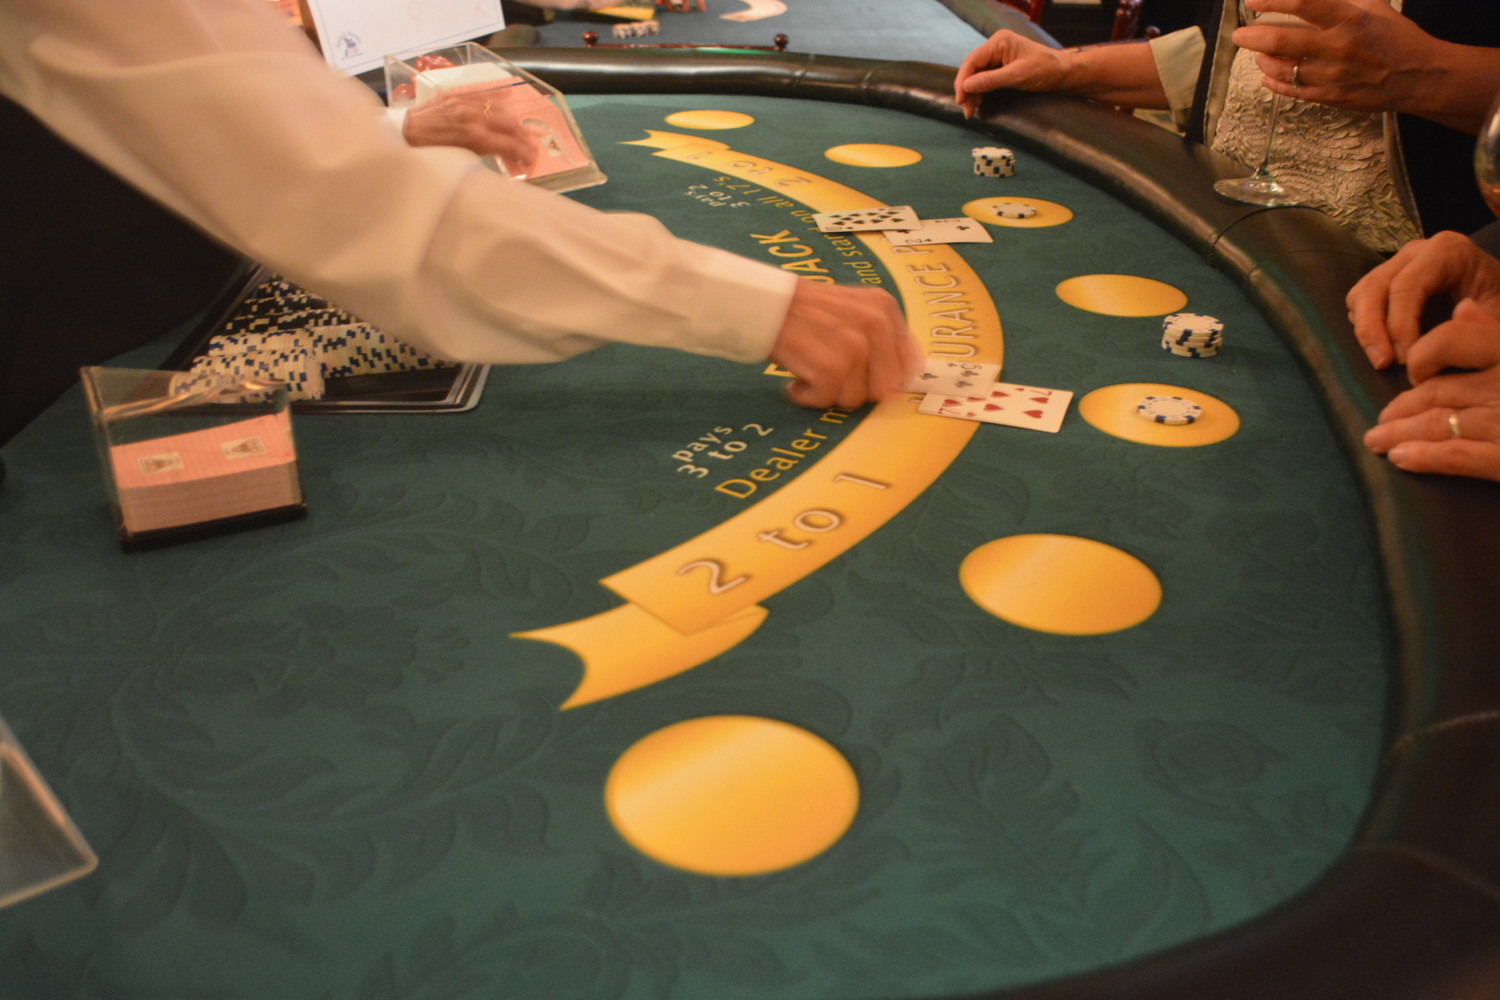 Attendees play cards at Casino Night on the Greens.